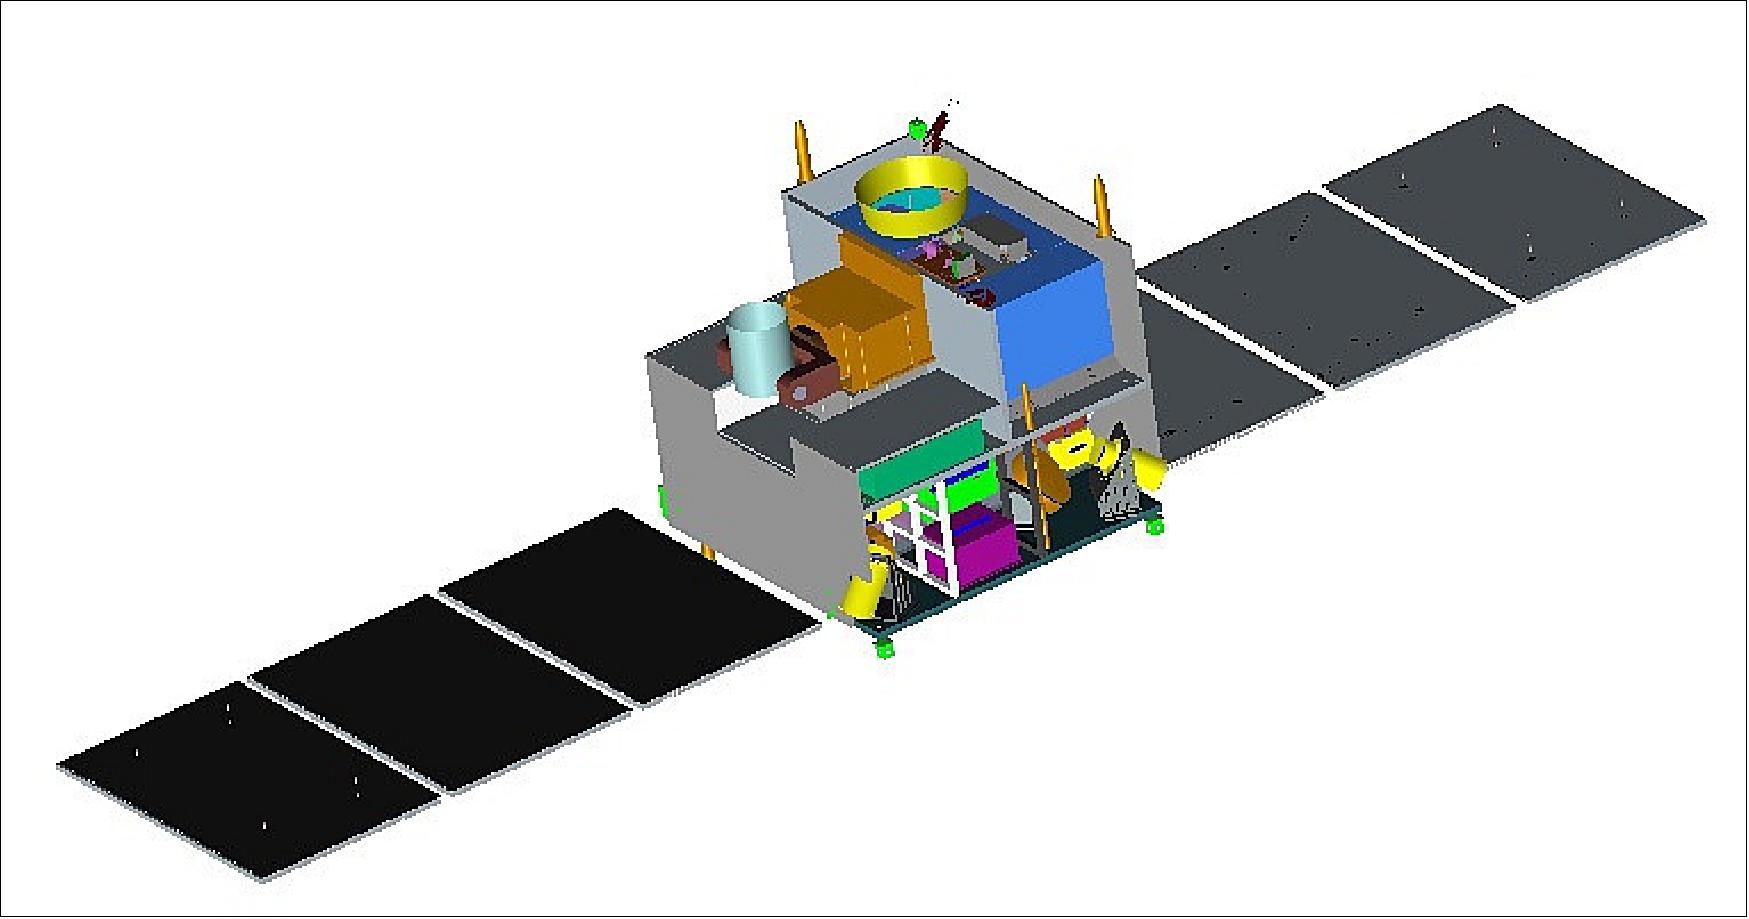 Figure 3: Illustration of the deployed QUESS spacecraft (image credit: CAS)